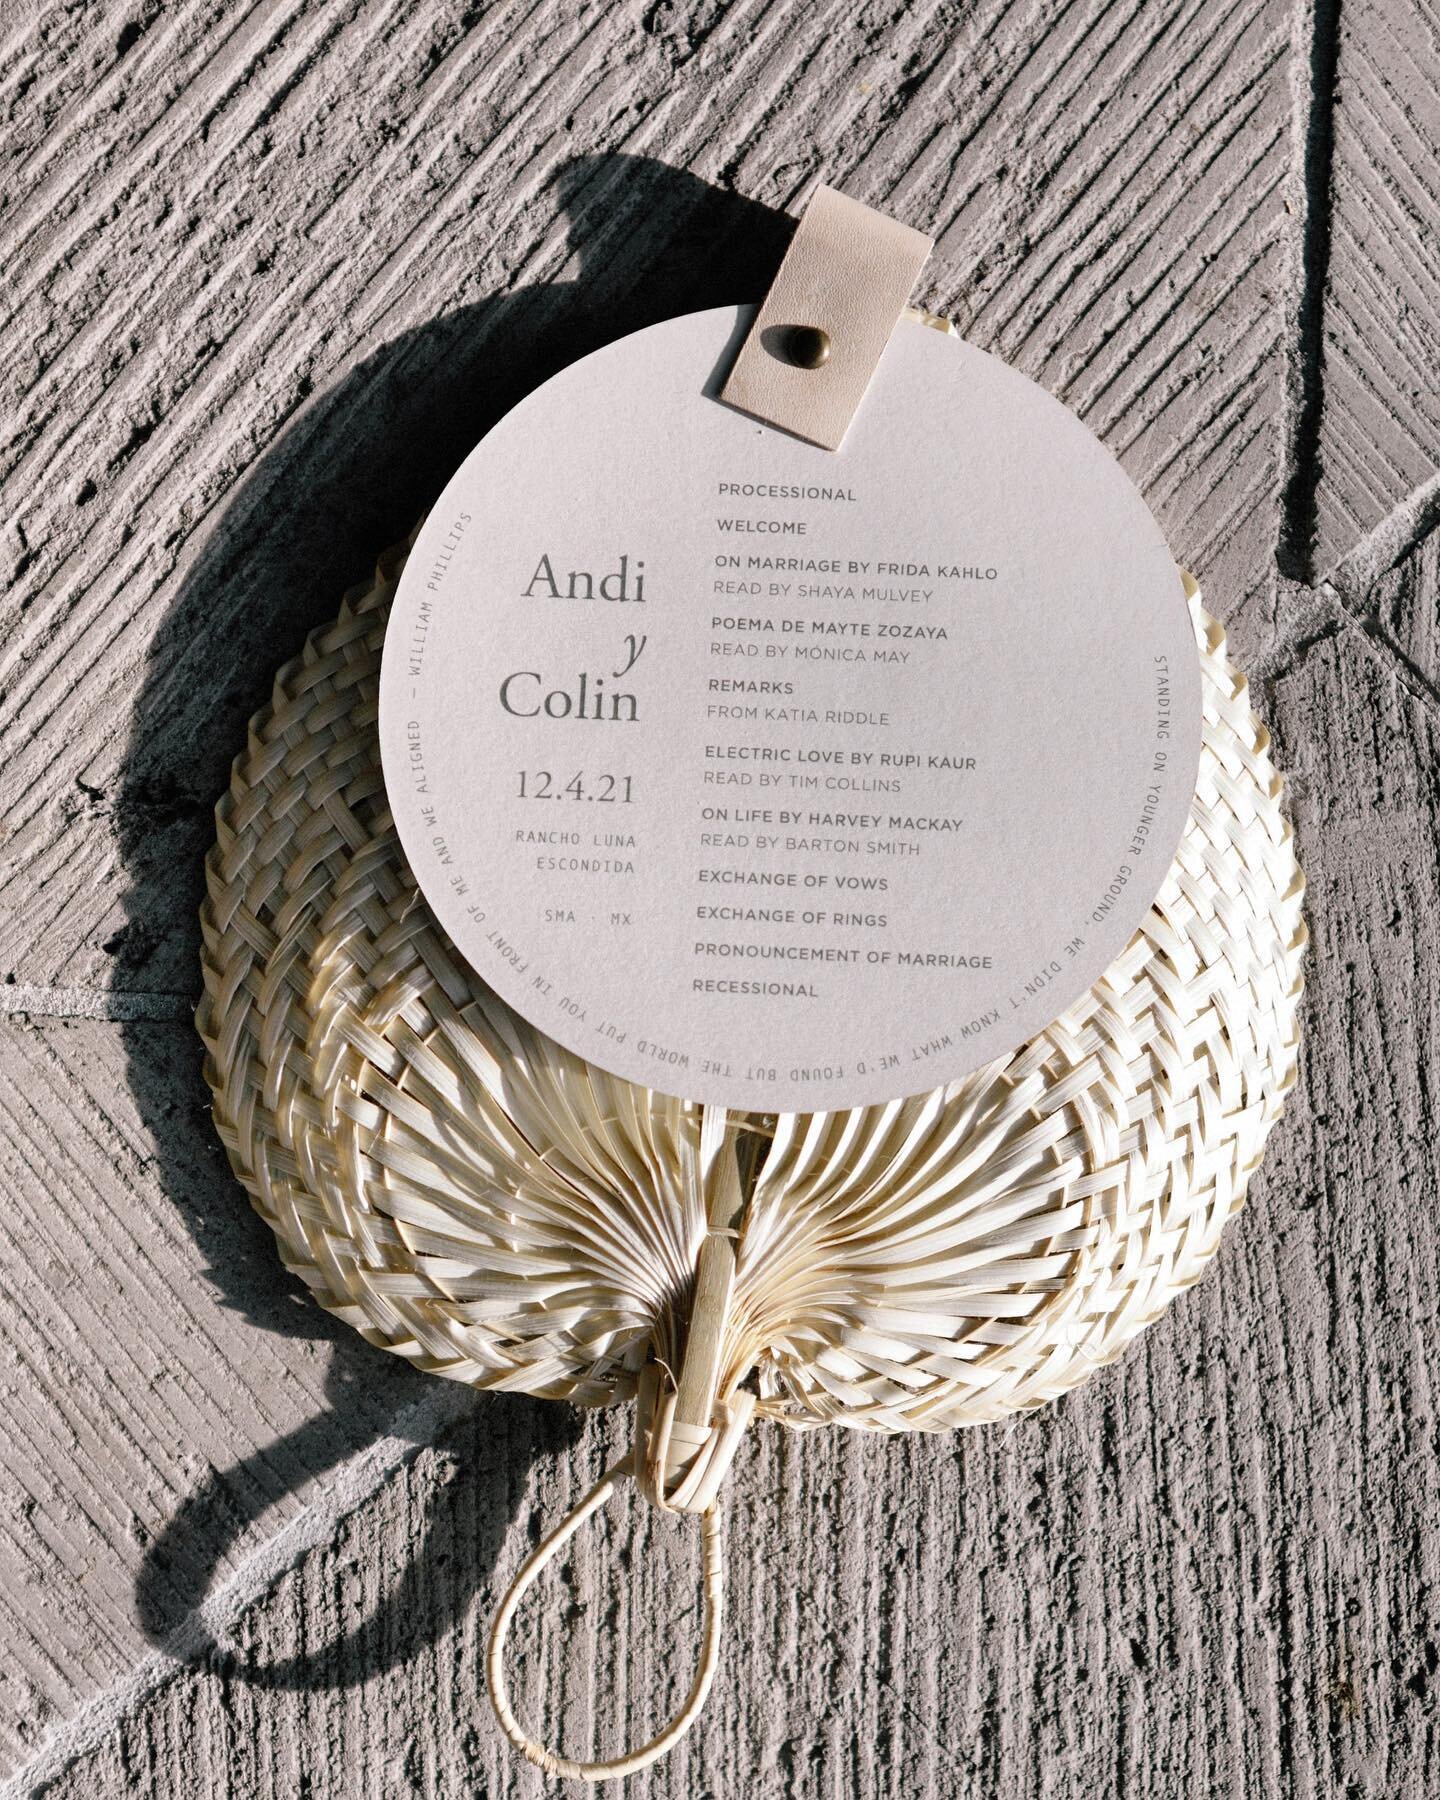 To program, or not to program? In our opinion, if you go for them, let&rsquo;s make them beautiful! And functional.

Die cut programs, with leather tags, printed with details on Andi and Colin&rsquo;s unforgettable wedding ceremony San Miguel de Alle